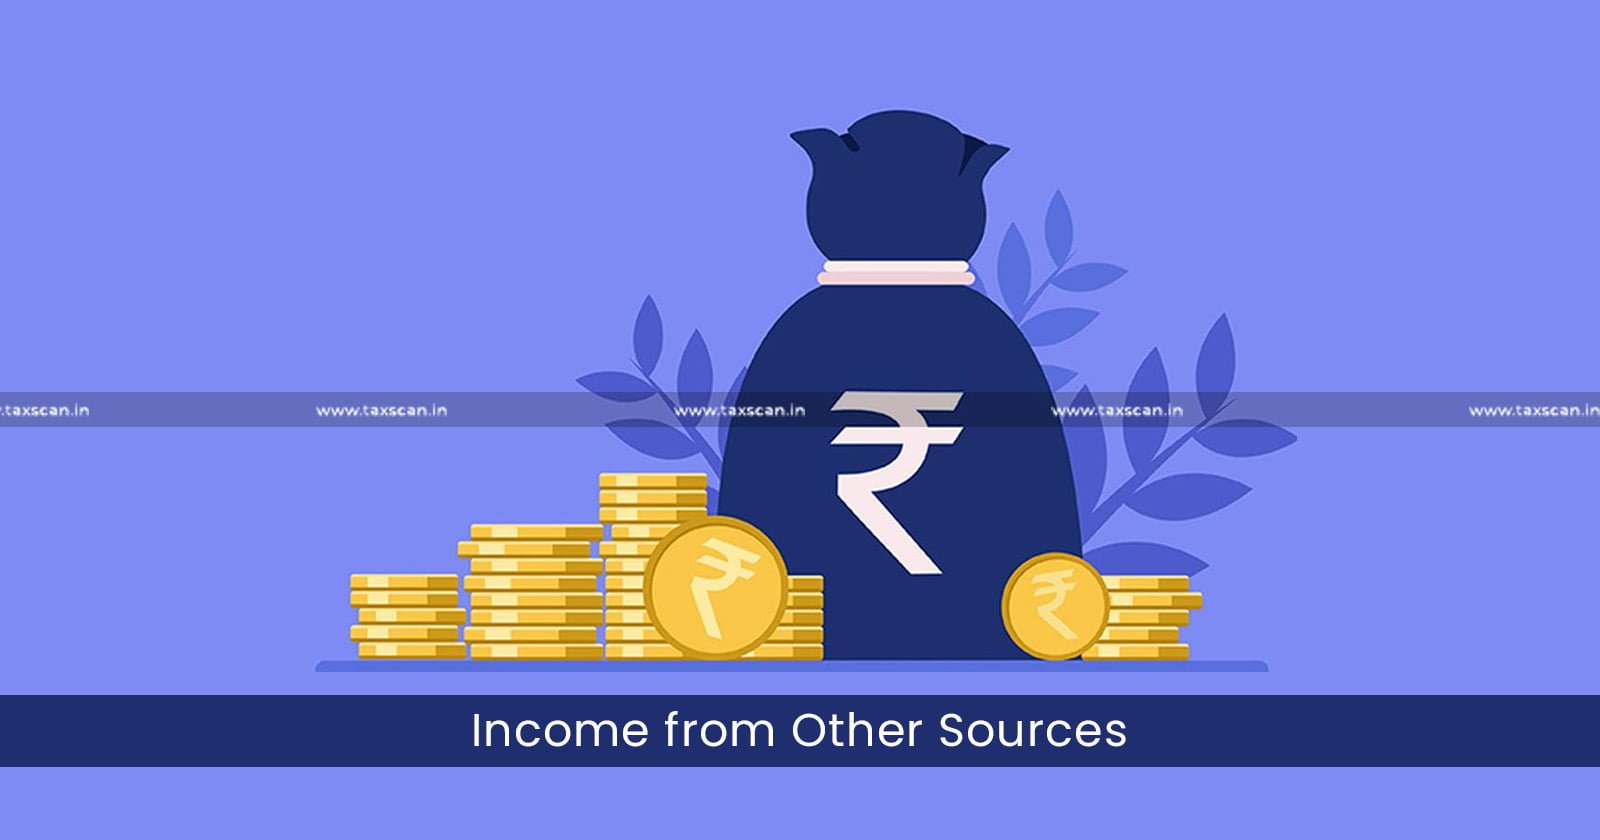 Enhanced Compensation is Taxable as Income - Enhanced Compensation - income tax - Interest - Delhi Bench - taxscan